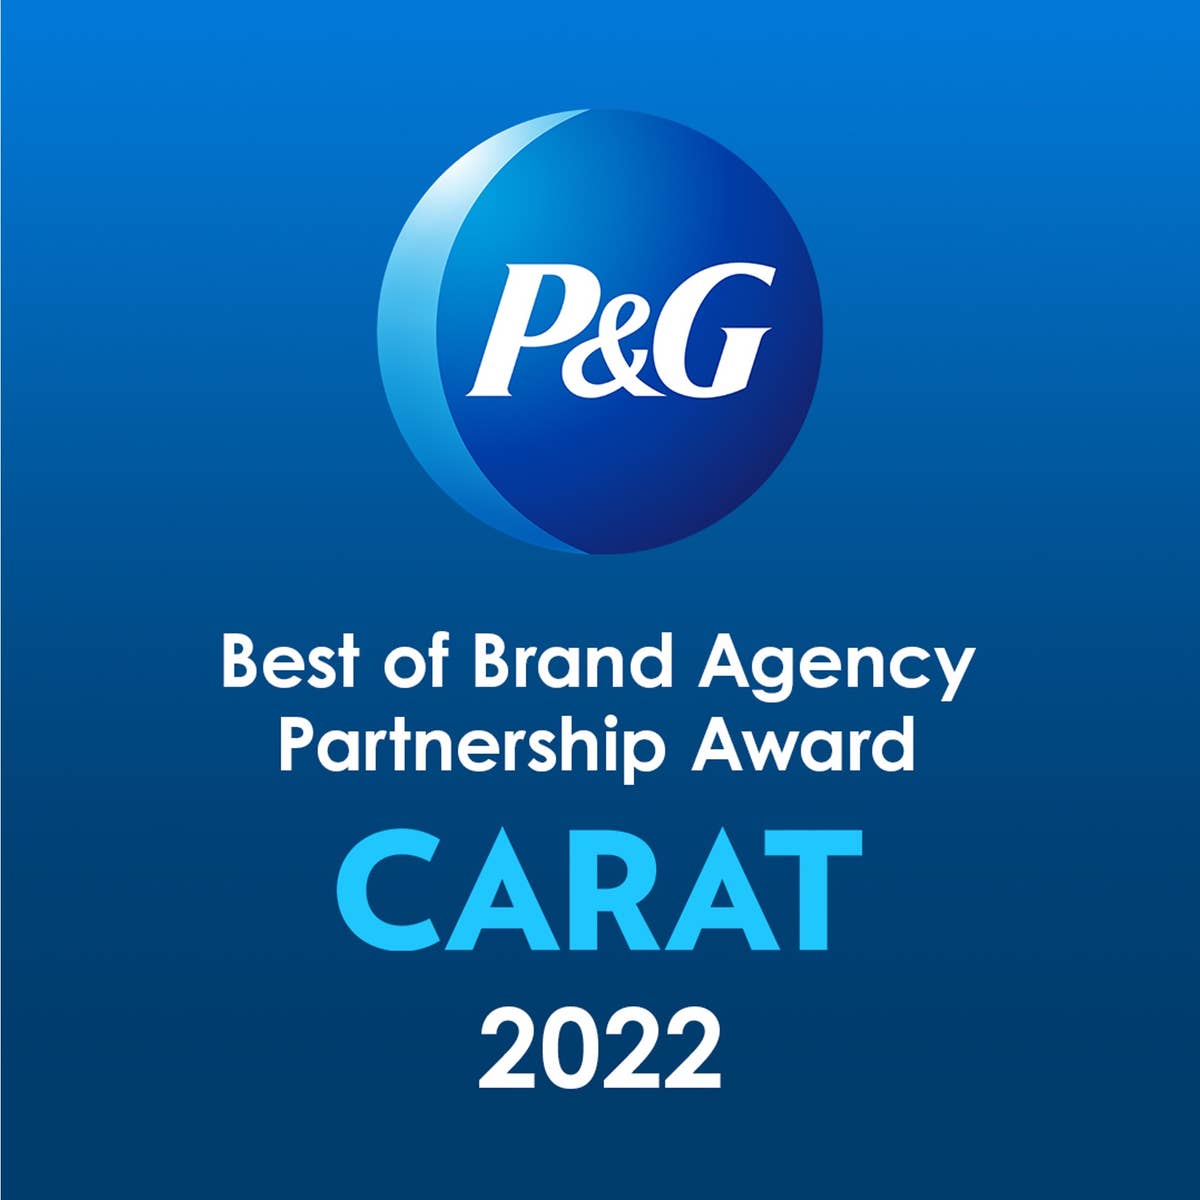 Carat recognized with first-ever “Best of Brand: Agency Partnership Award” by P&G client